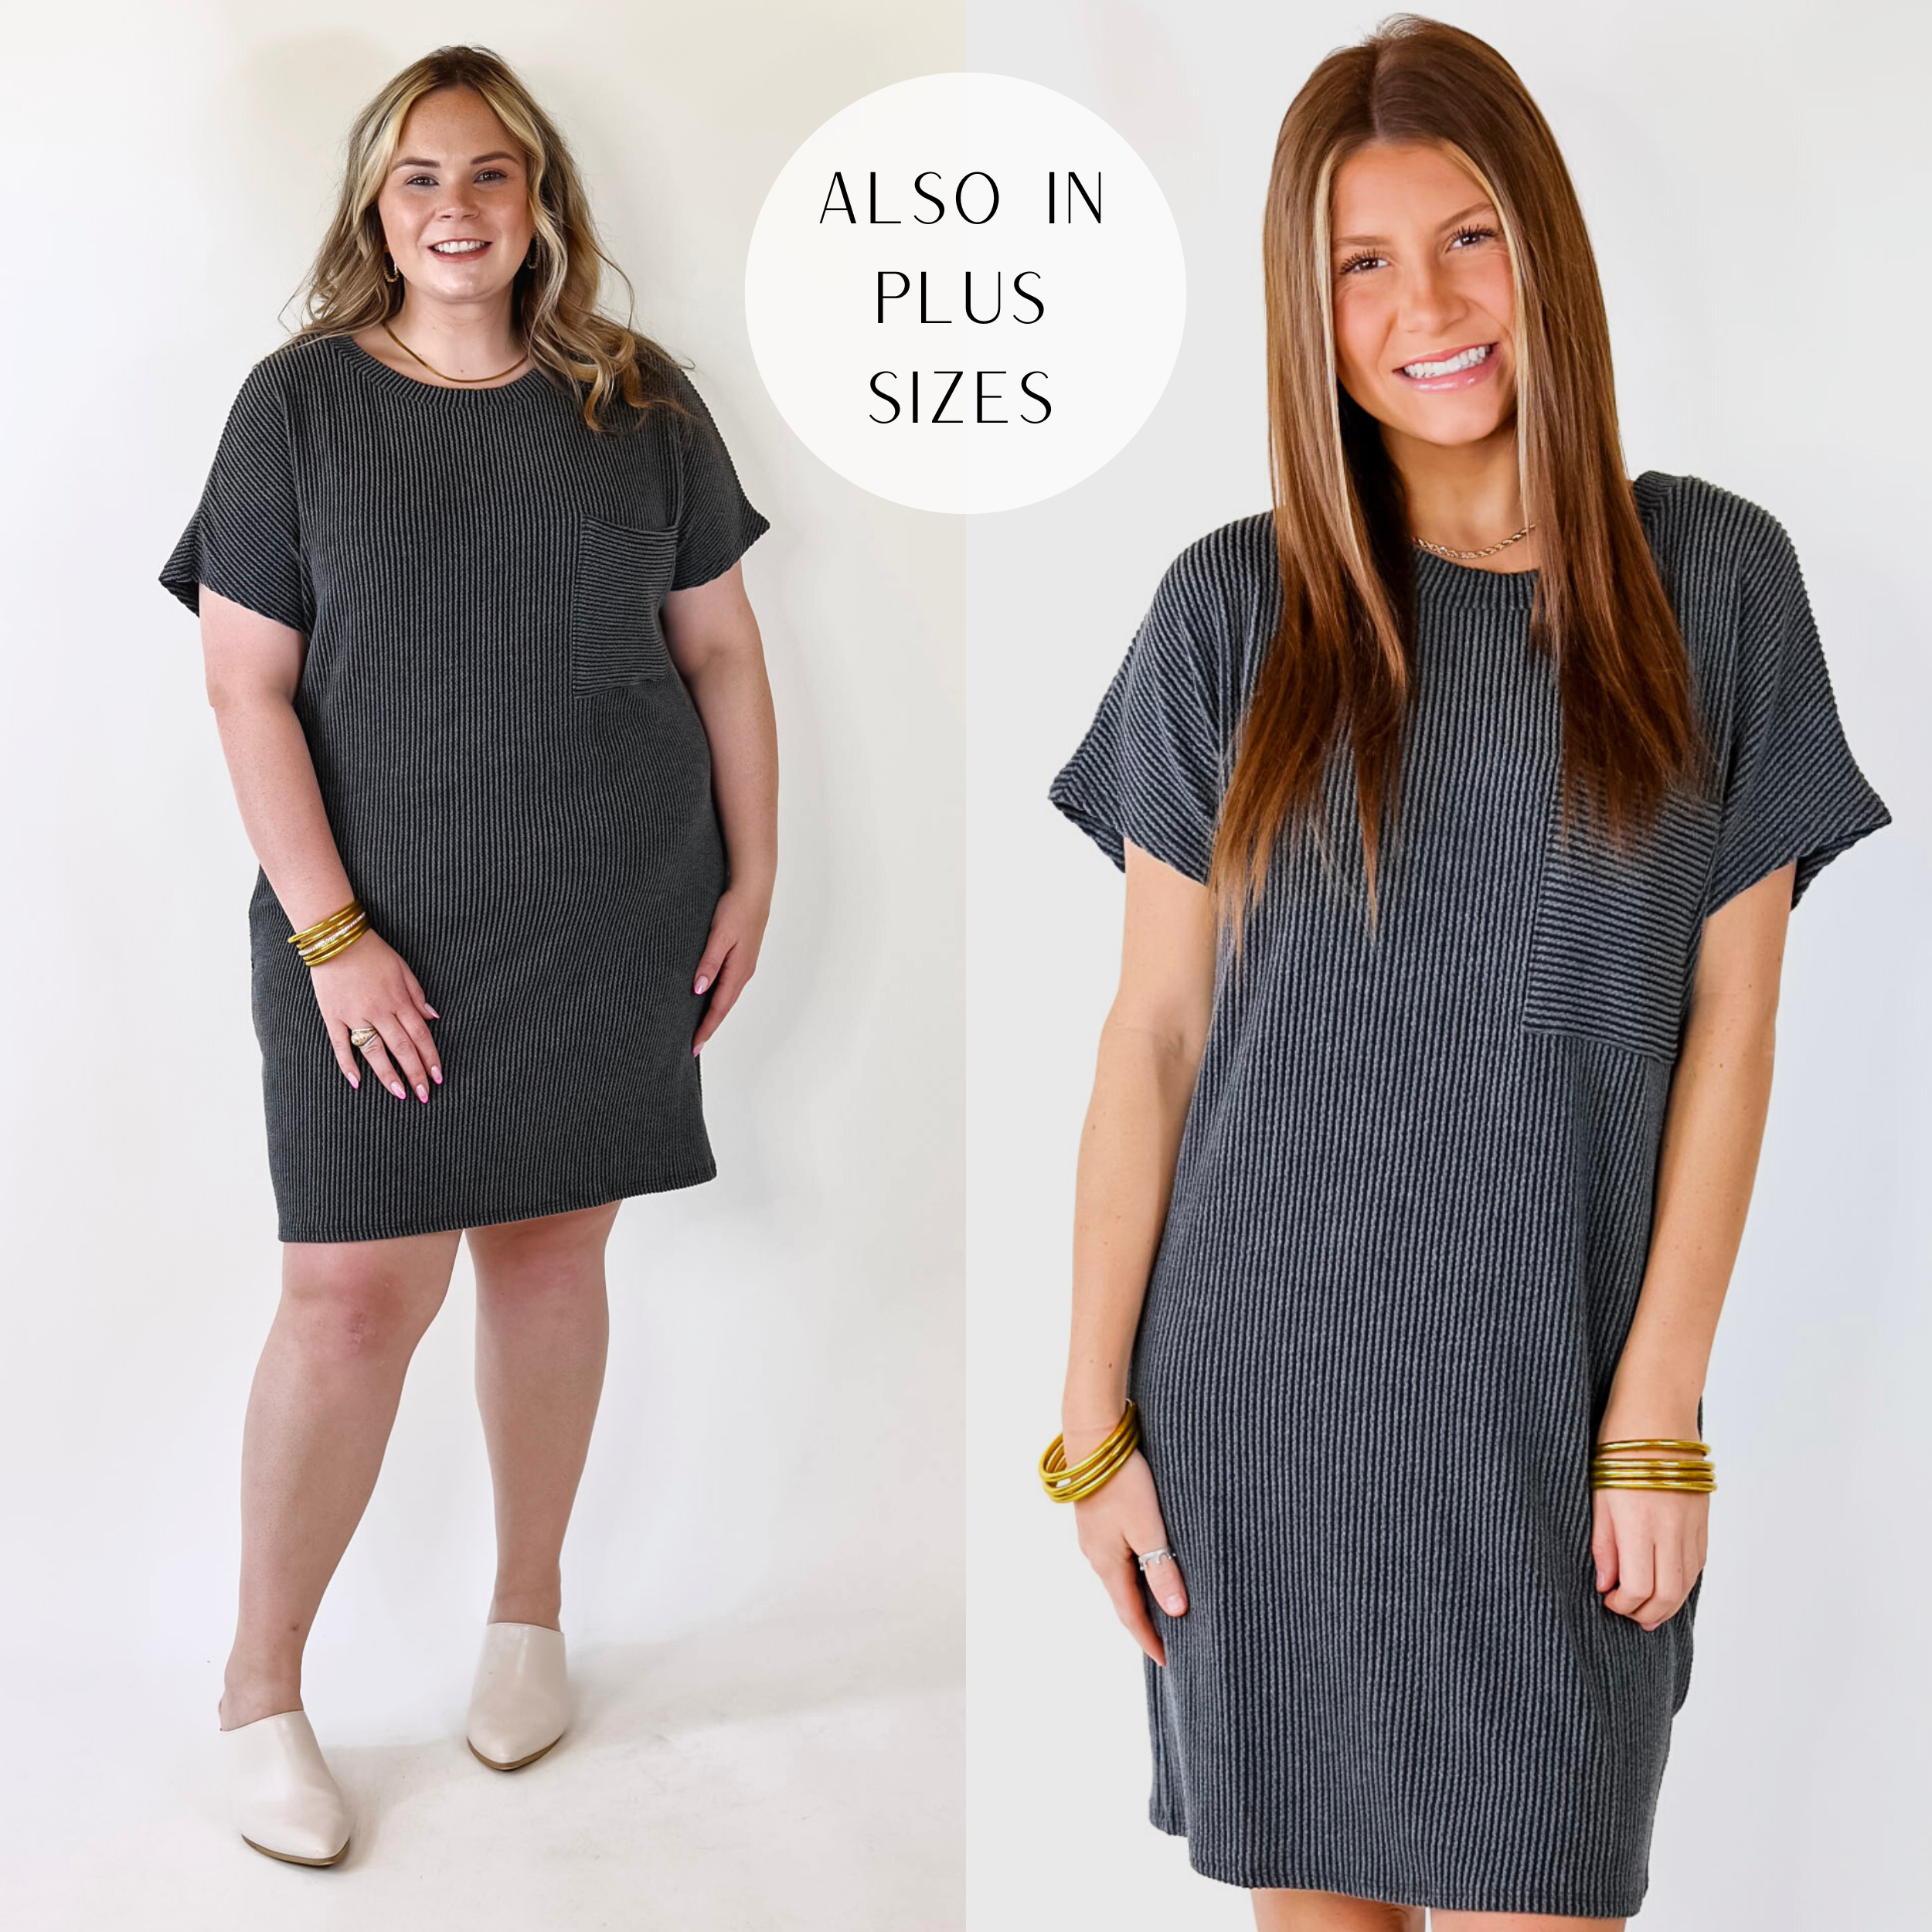 Coffee and Carefree Ribbed Short Sleeve Dress with Front Pocket in Charcoal - Giddy Up Glamour Boutique